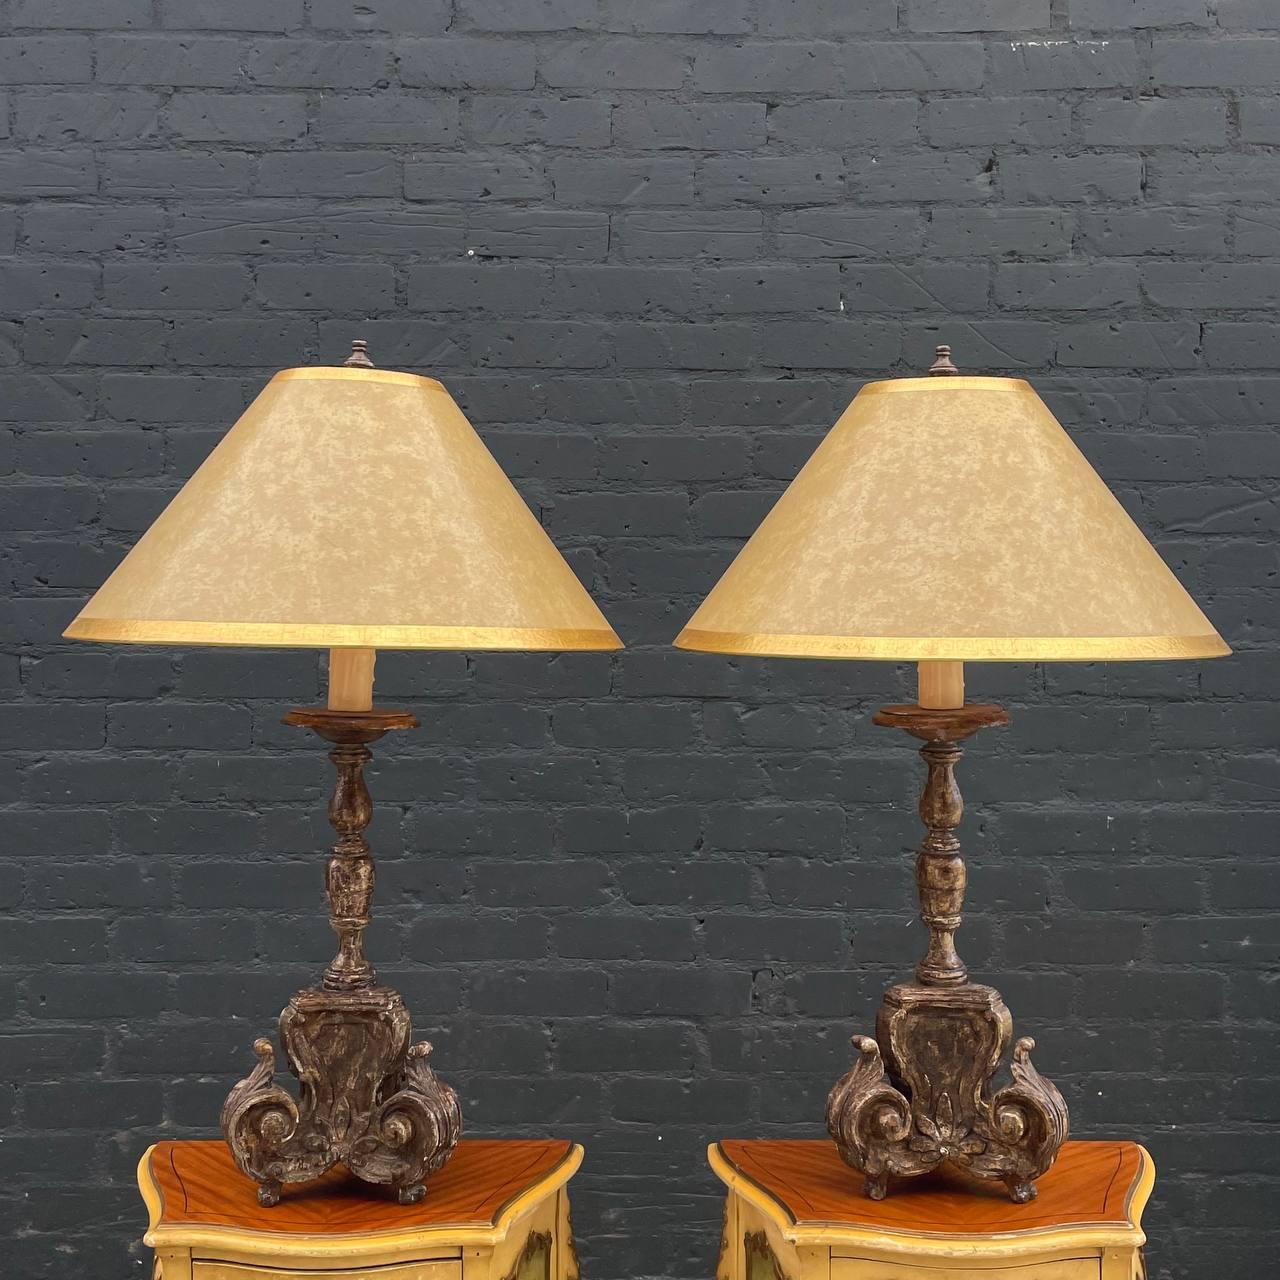 Pair of Italian Antique Candlestick Style Table Lamps with a Distressed Paint Finish 

Country: Italy
Materials: Distressed Wood, Original Shade
Style: Italian Antique 
Year: 1940’s

$2,200 pair 

Dimensions:
37”H x 10.50”W x